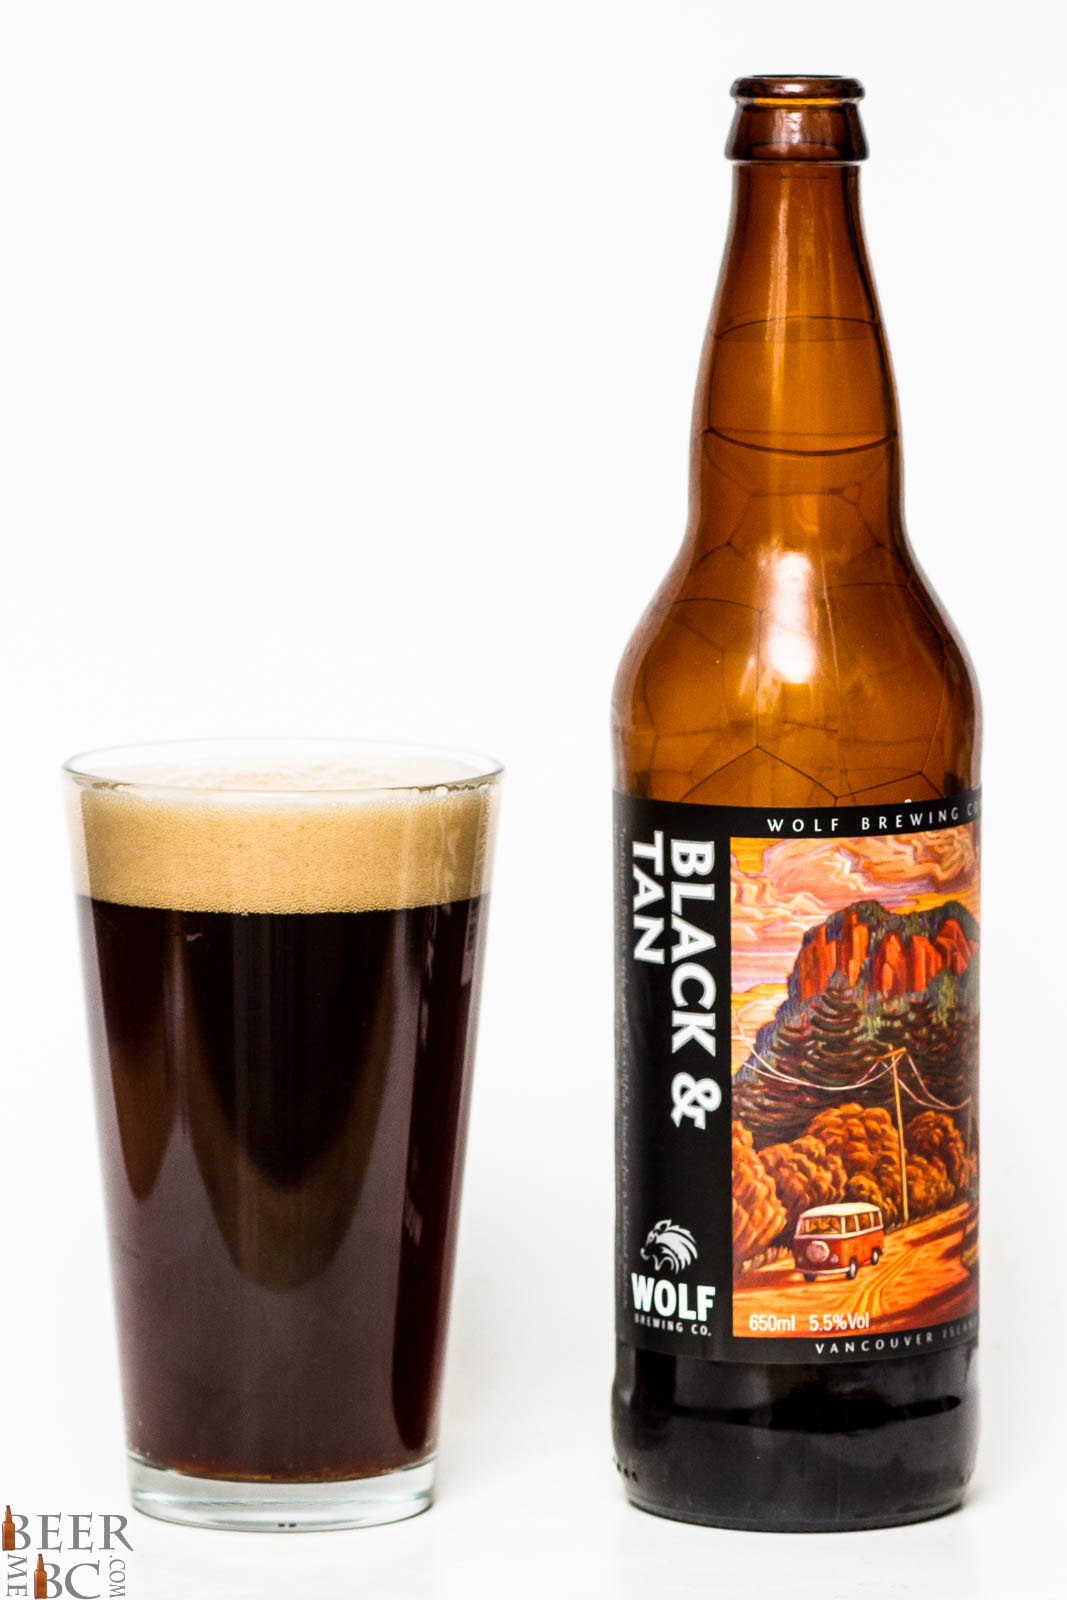 Black And Tan Review A Black and Tan is not really a beer style but rather ...